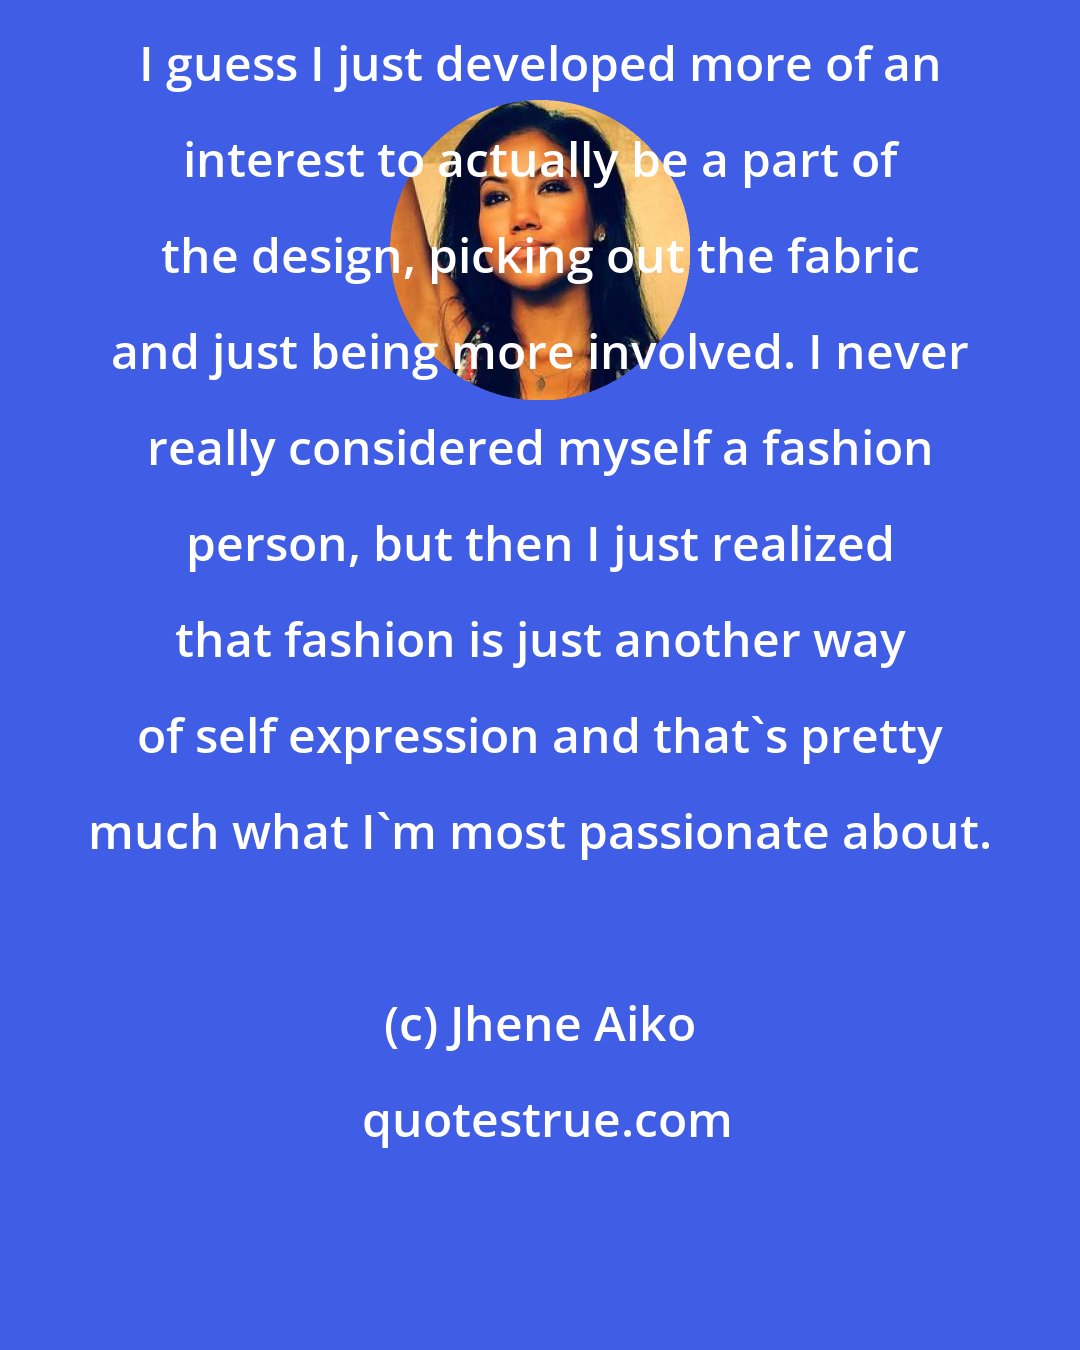 Jhene Aiko: I guess I just developed more of an interest to actually be a part of the design, picking out the fabric and just being more involved. I never really considered myself a fashion person, but then I just realized that fashion is just another way of self expression and that's pretty much what I'm most passionate about.